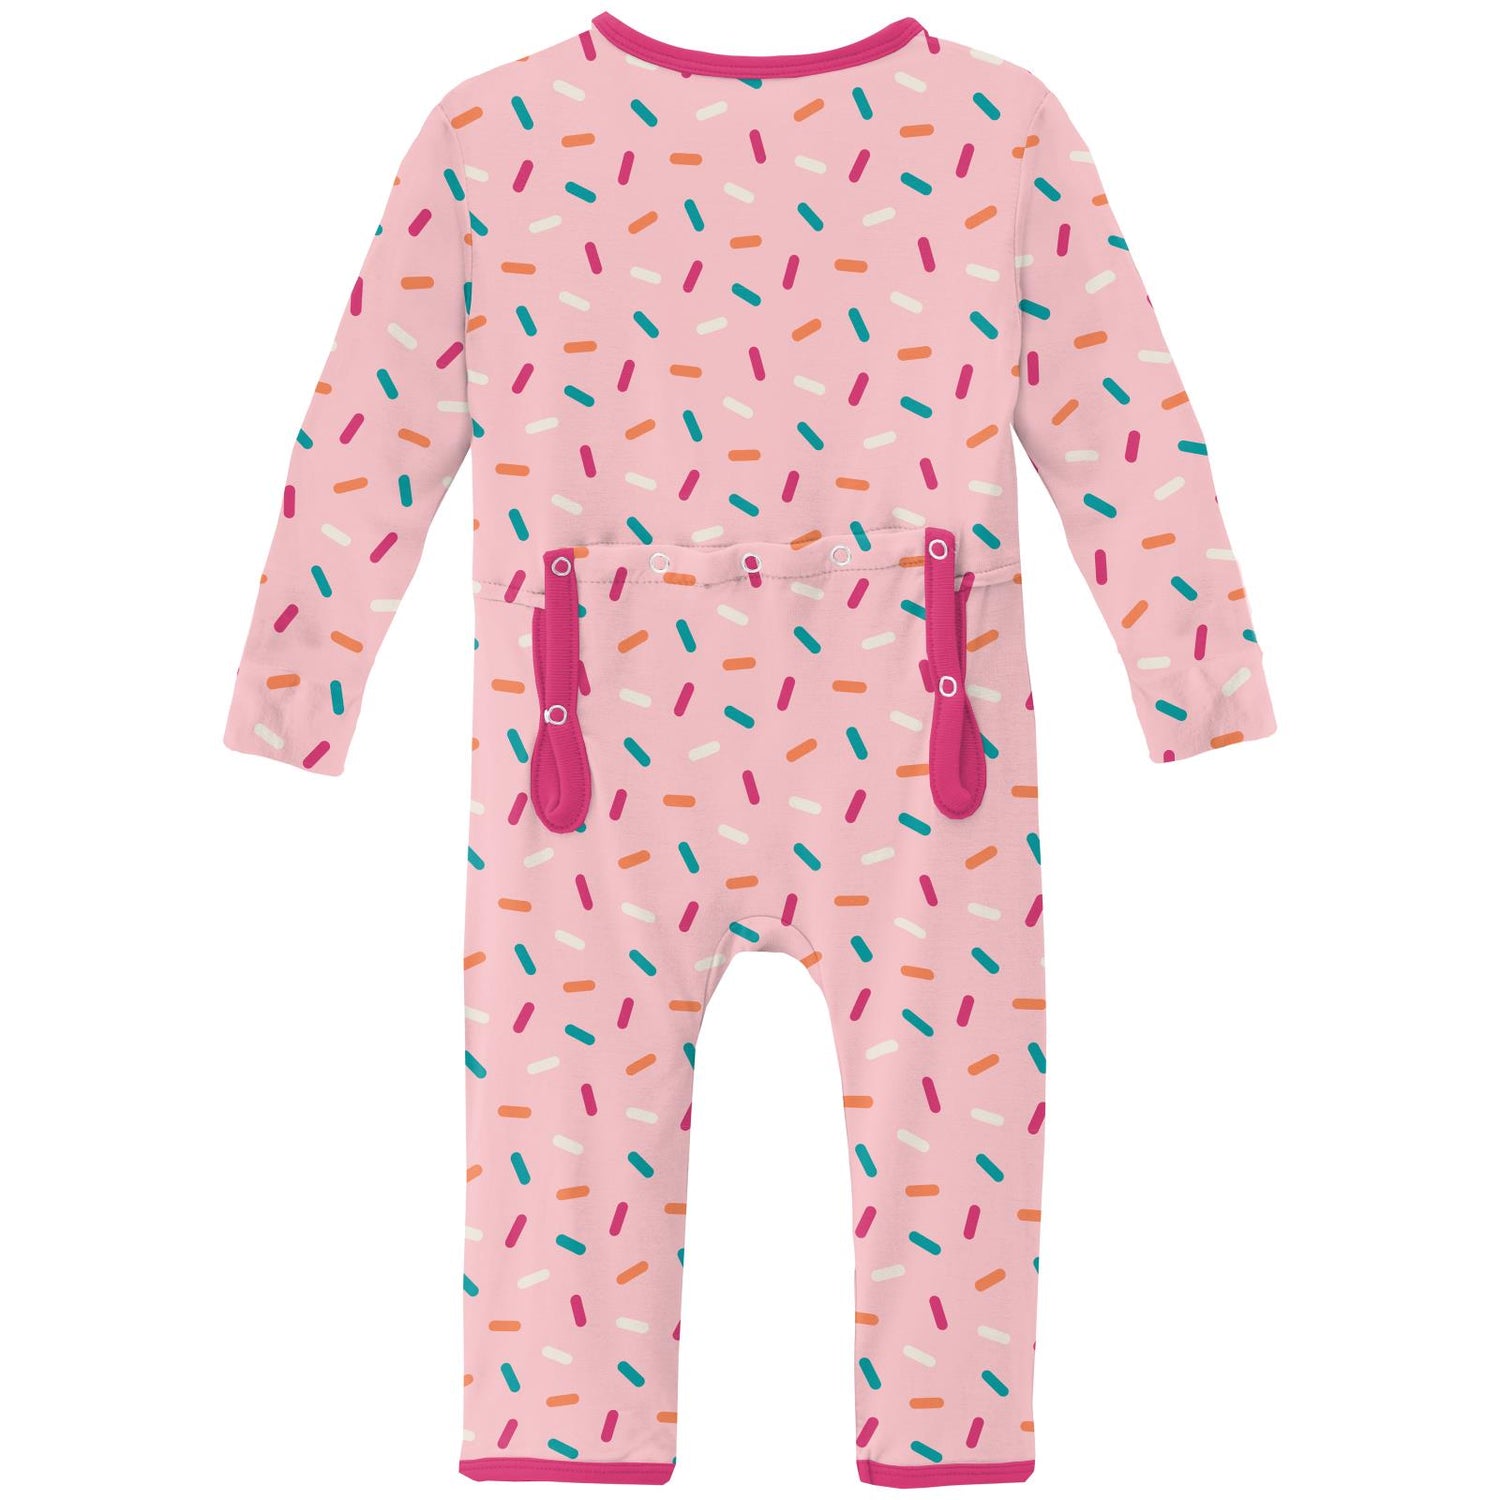 Print Coverall with 2 Way Zipper in Lotus Sprinkles